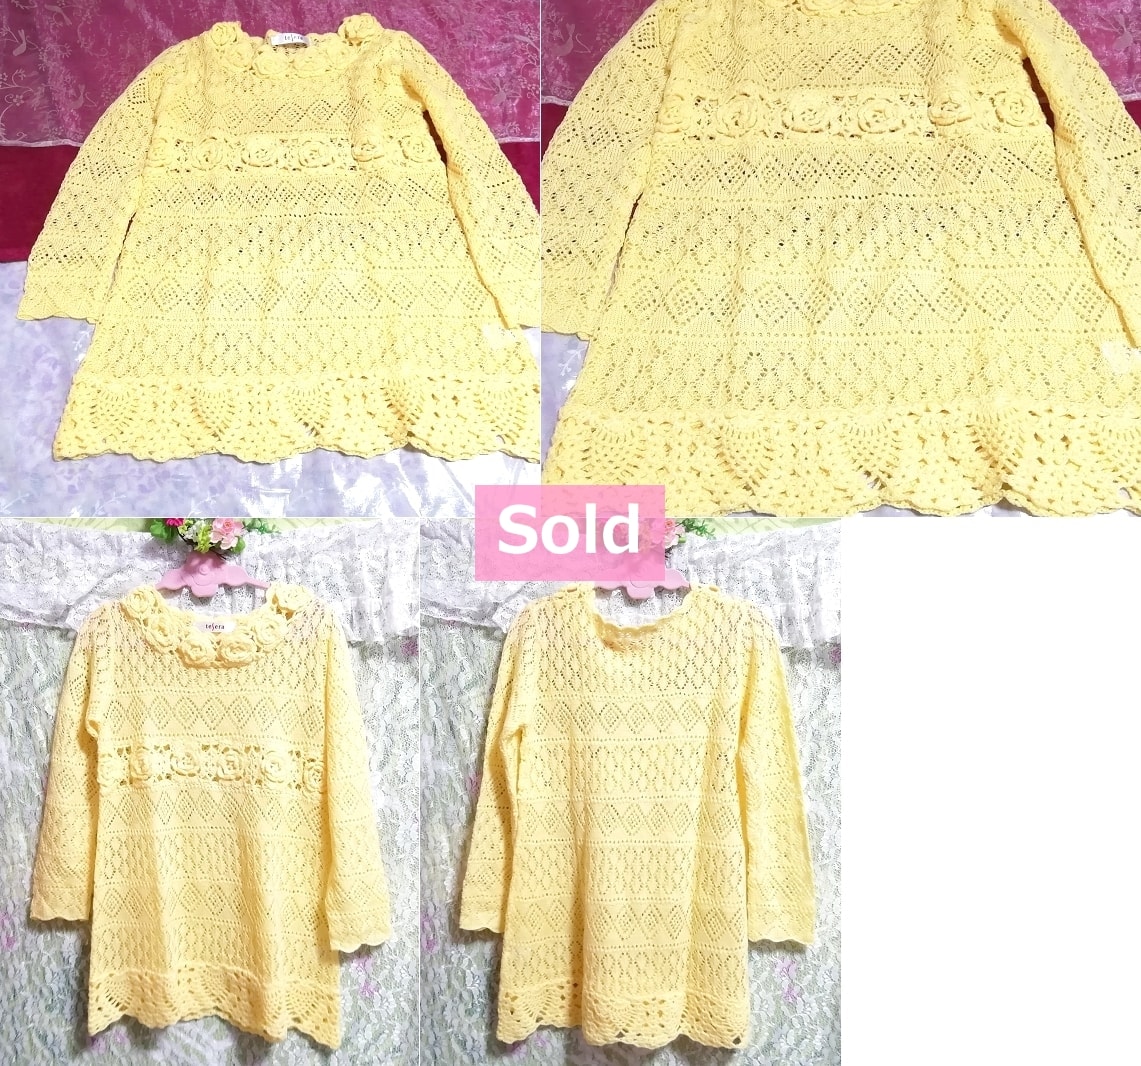 Yellow flower lace long sleeve sweater knit tops